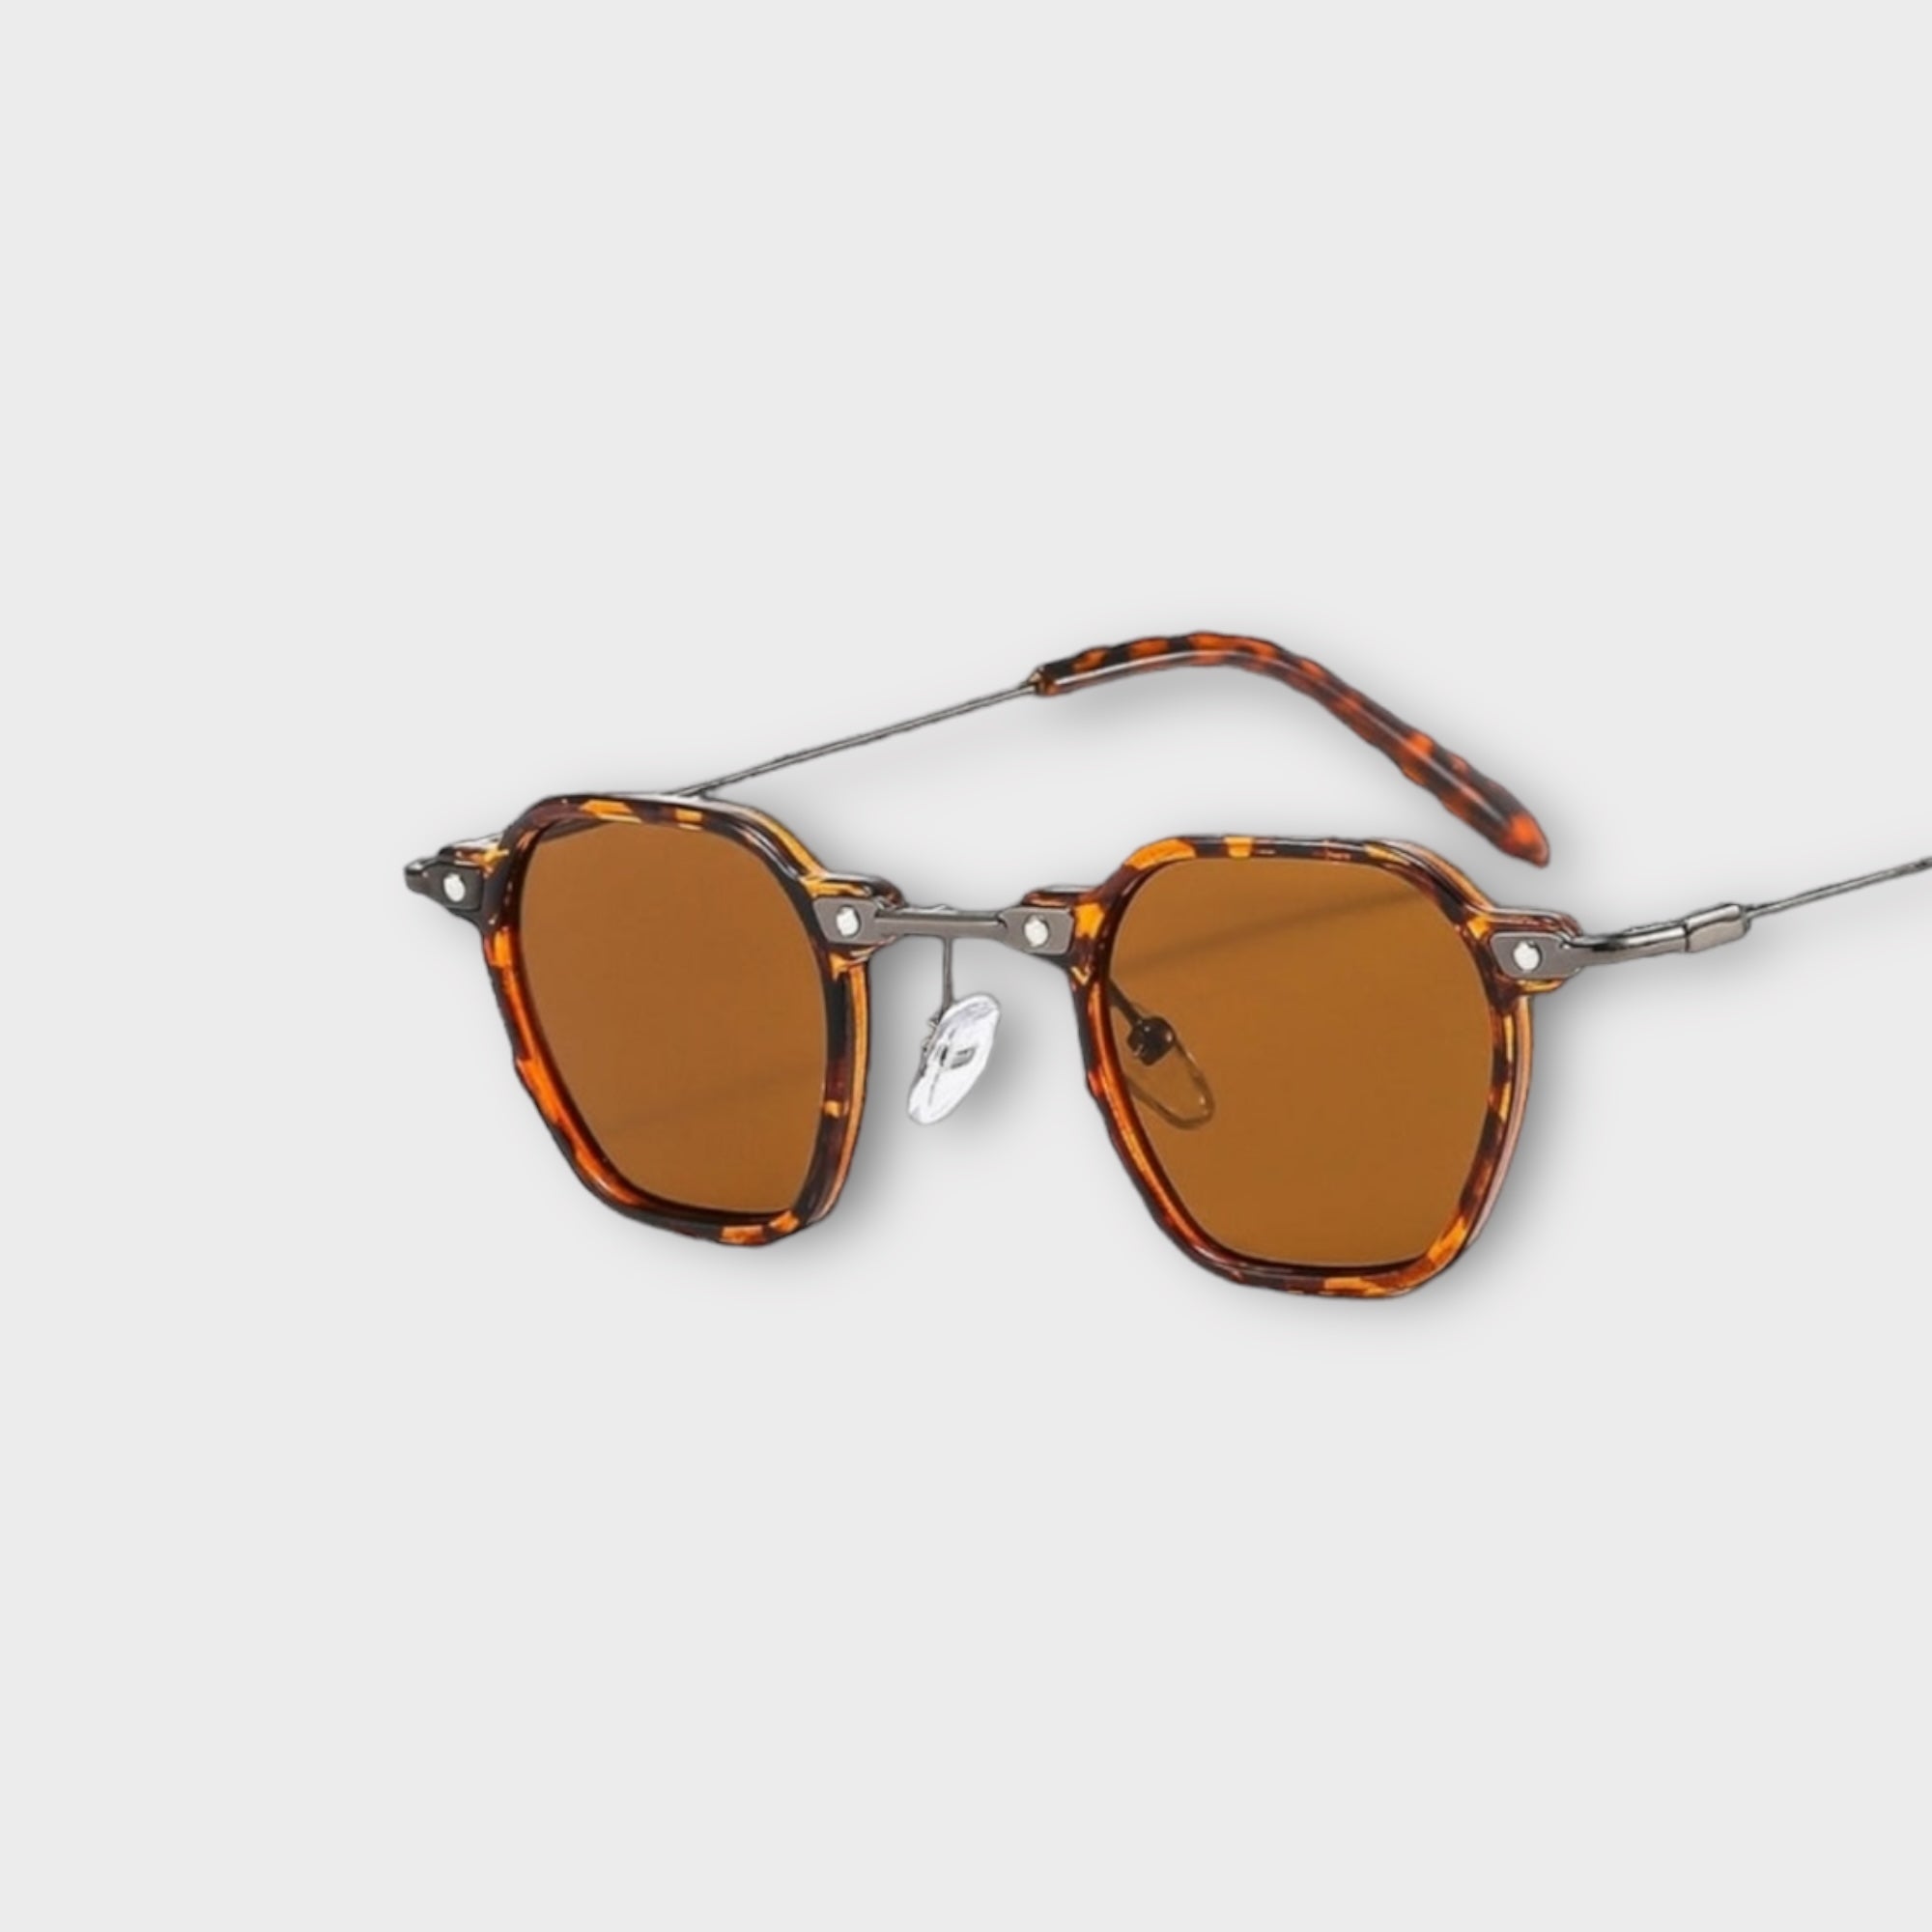 'DDEP' New round sunglasses for men and women